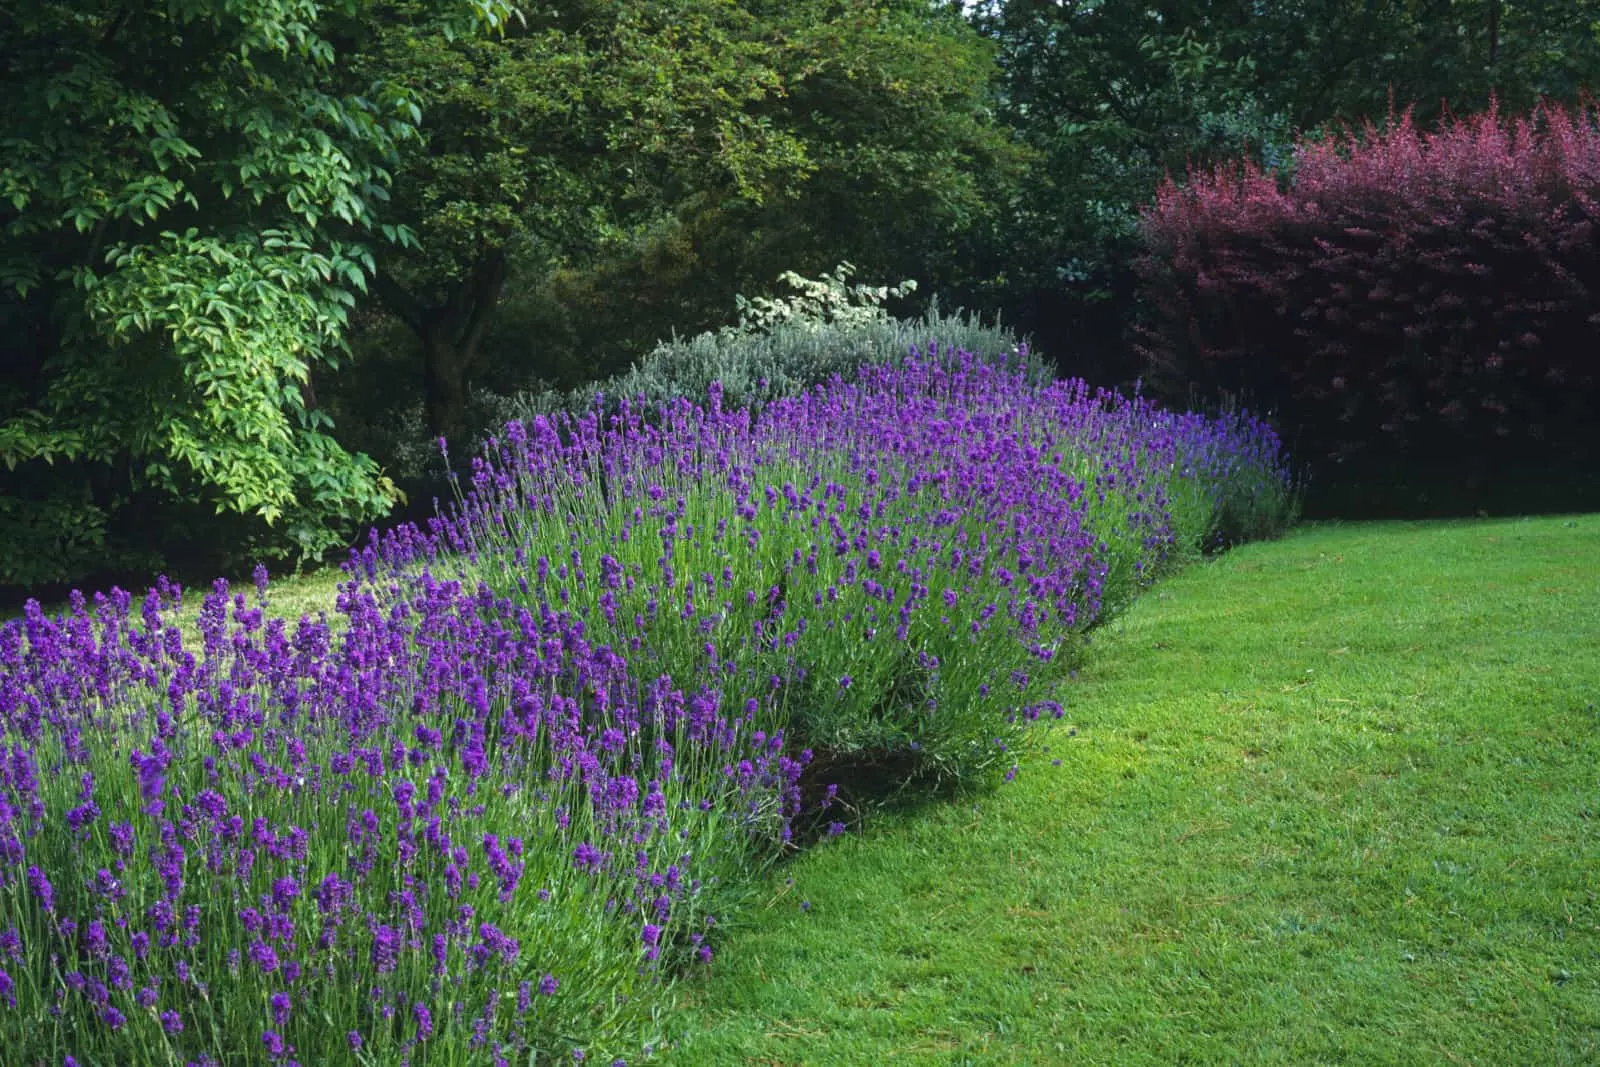 Lavender hedge in flower at a Country Garden